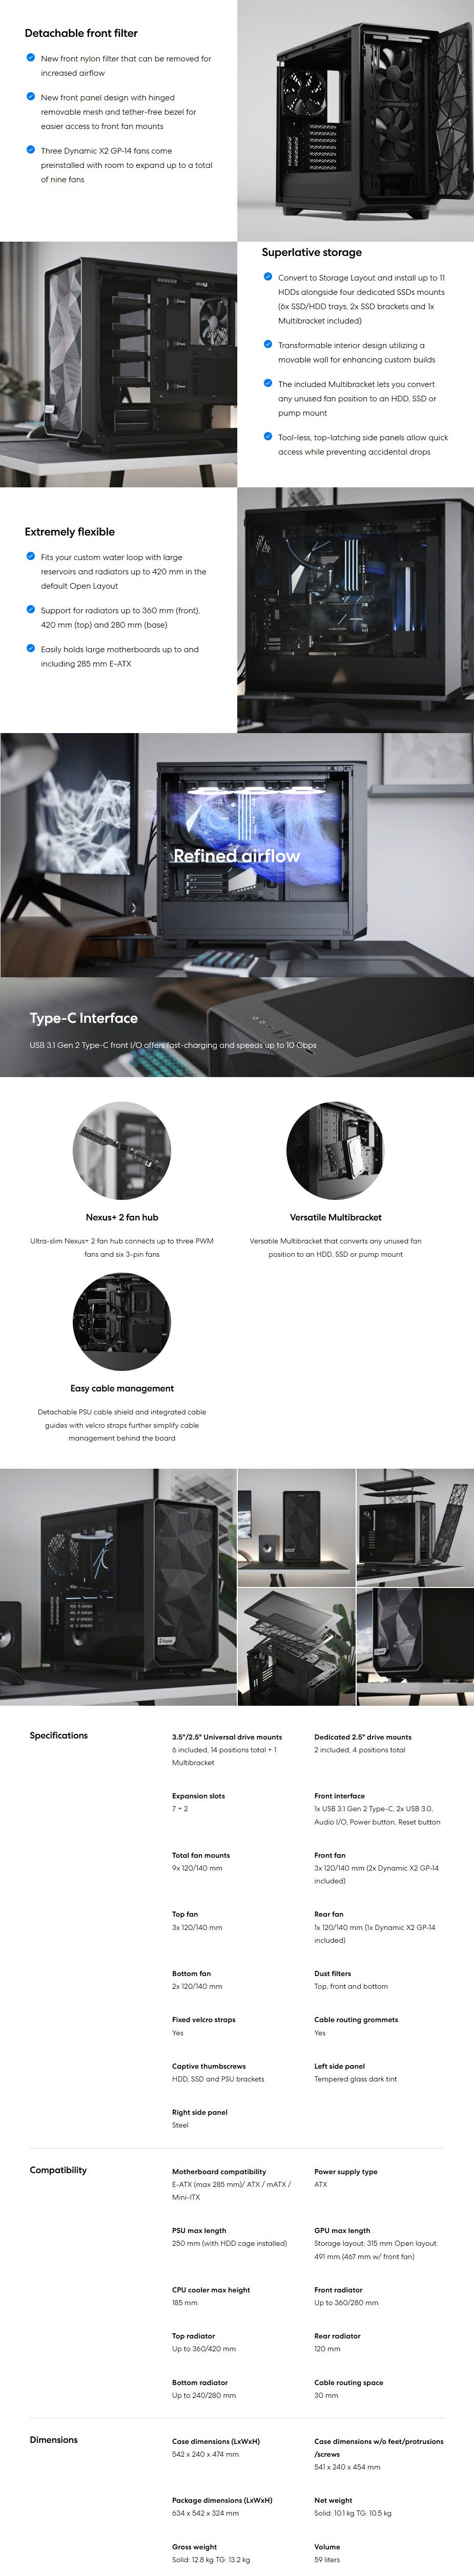 A large marketing image providing additional information about the product Fractal Design Meshify 2 Dark Tempered Glass Mid Tower Case Black - Additional alt info not provided